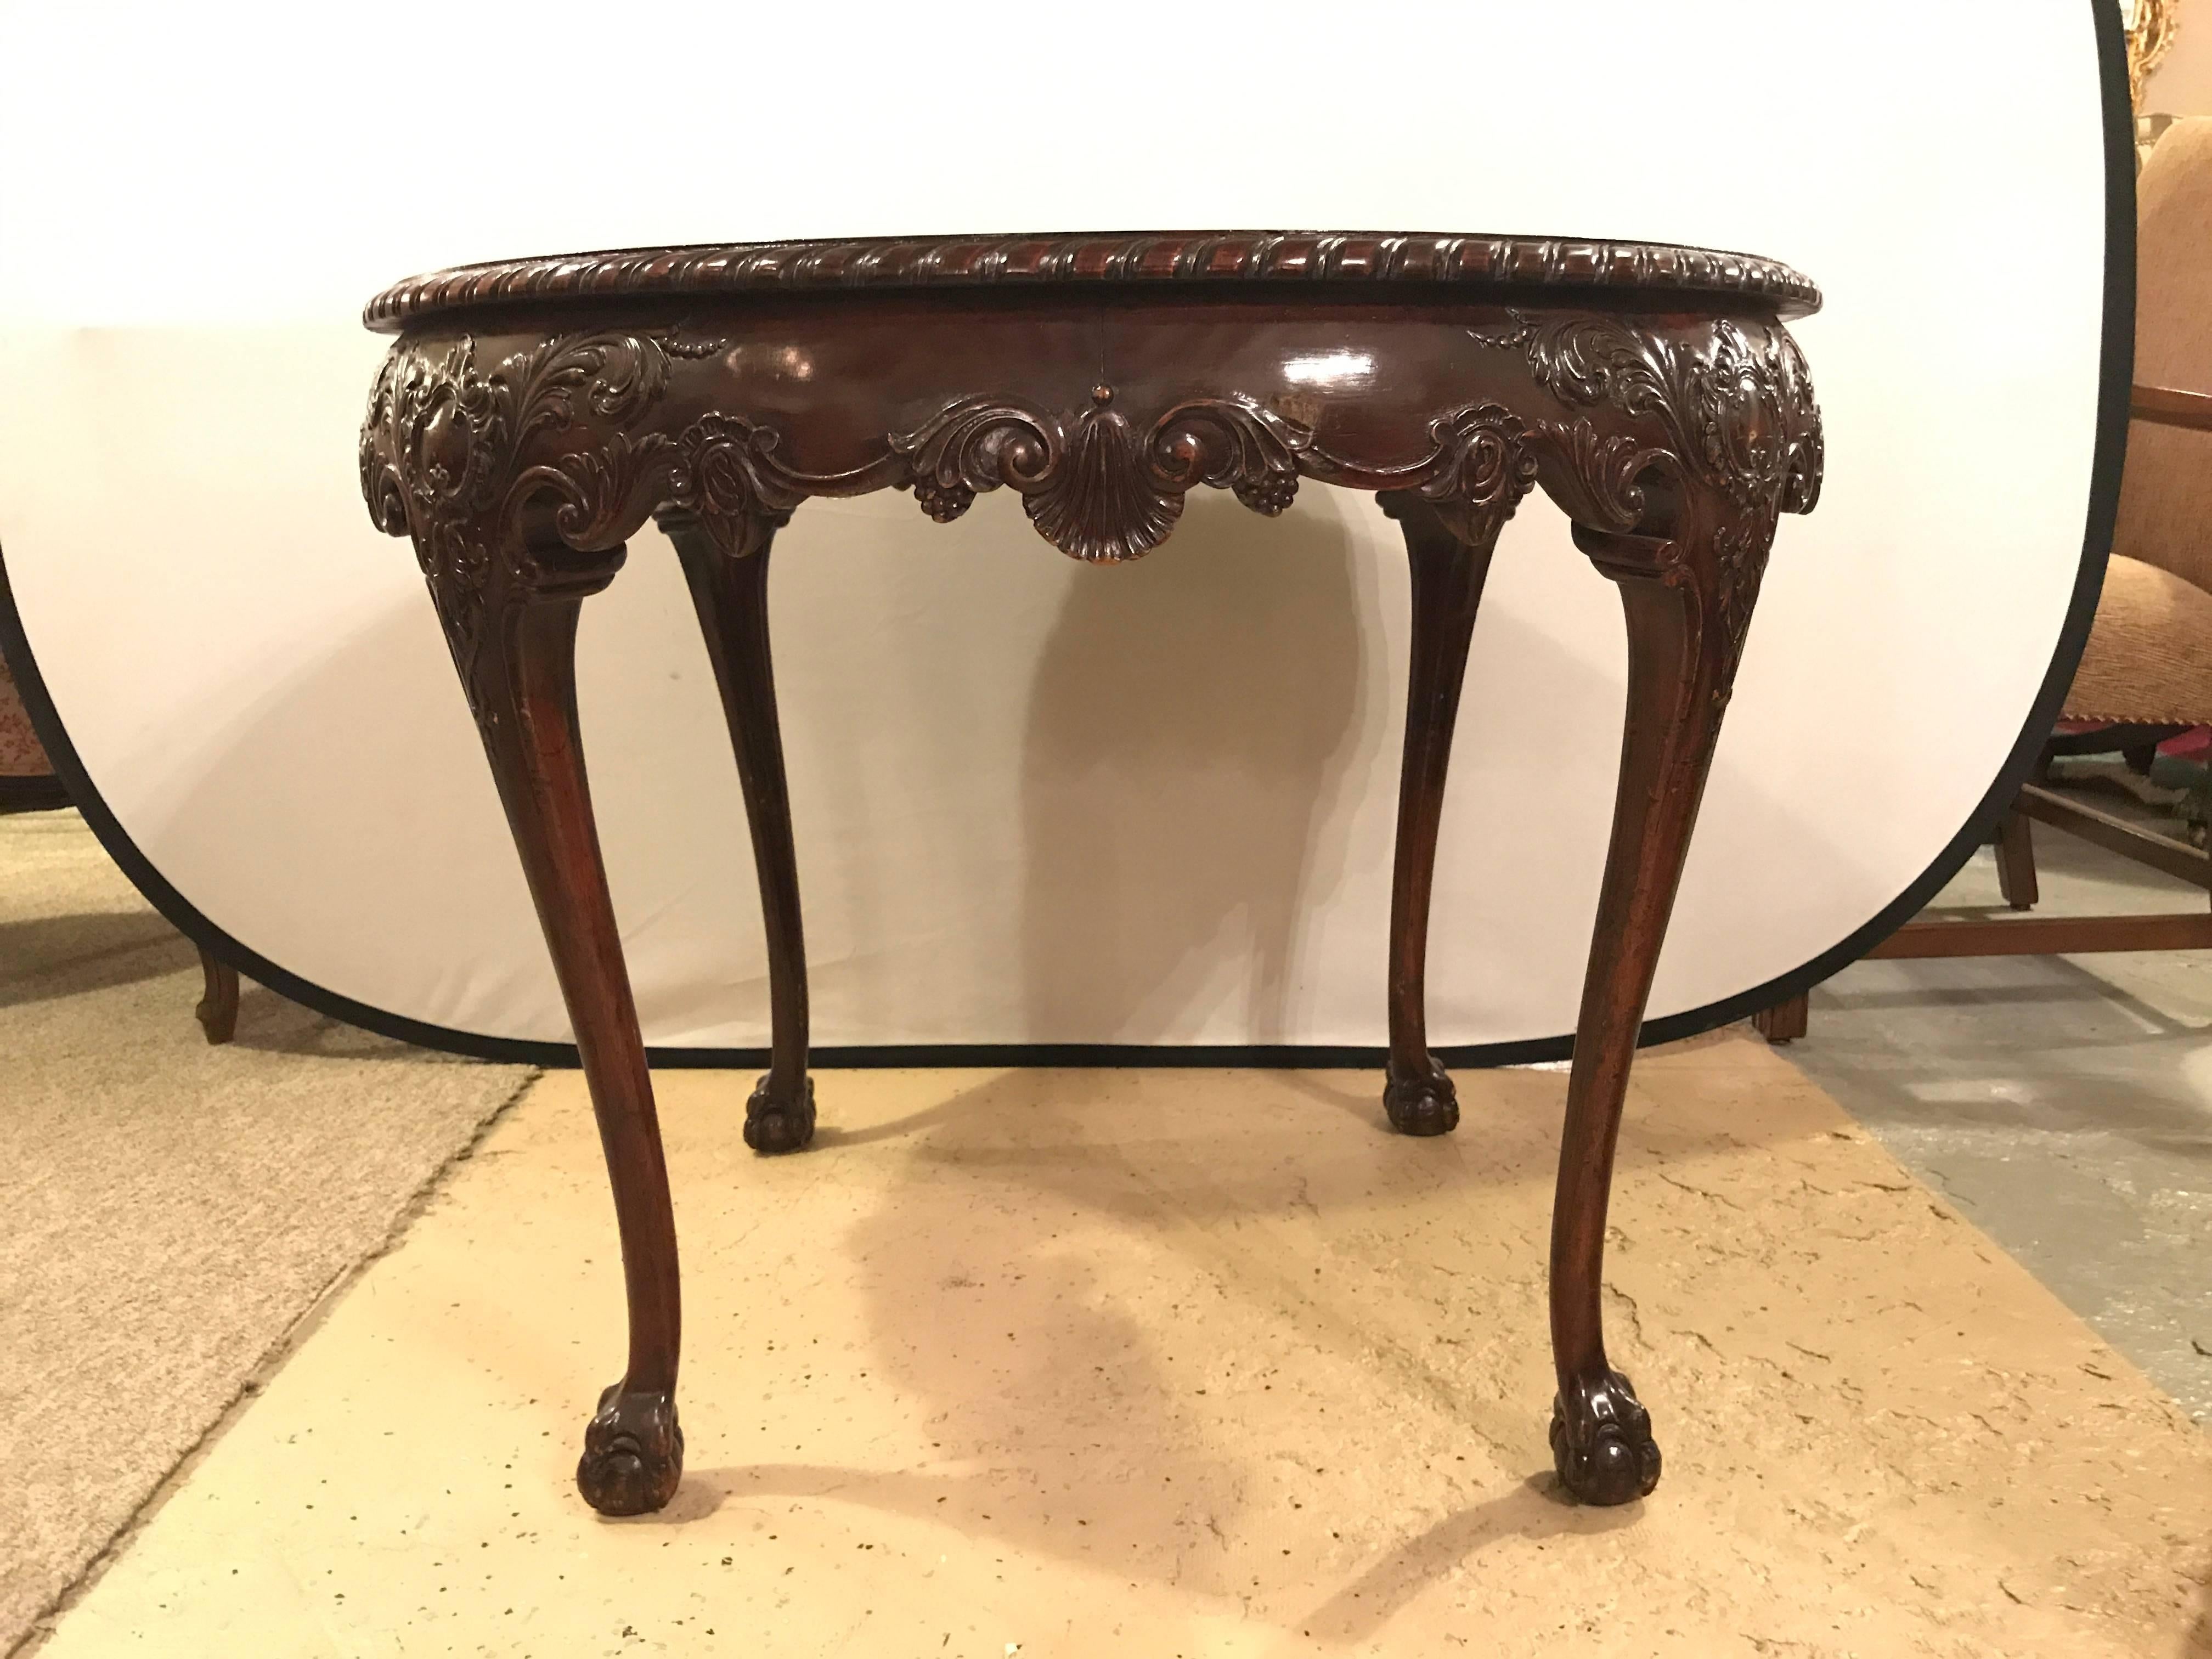 Georgian Style Centre table, circular on ball and claw feet with cabriole legs. The scalloped edged top supported by a carved apron of shell and floral design with curved legs leading to ball and claw feet. Sale due to small veneer damage to top. 